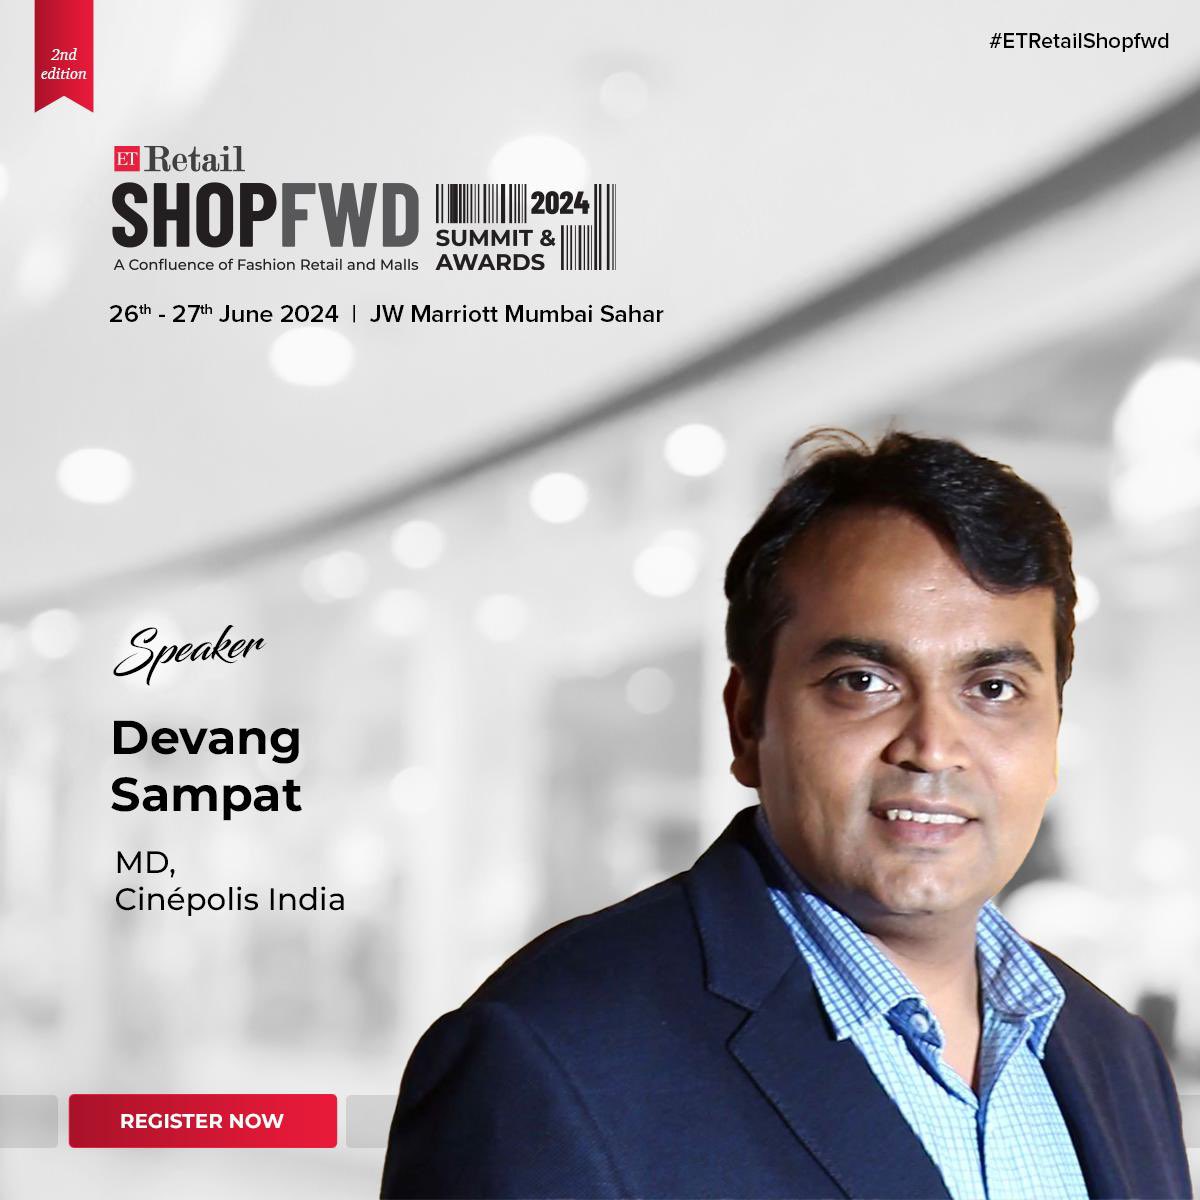 We're thrilled to welcome our esteemed speaker, Devang Sampat, MD of @IndiaCinepolis, to the 2nd edition of ETRetail Shopfwd Summit 2024. Know more- bit.ly/3U1BdMS #ETRetail #ETRetailShopFwd #ShopfwdExpo #MallConfluenceExpo #FashionForward #FashionRetail #RetailTech